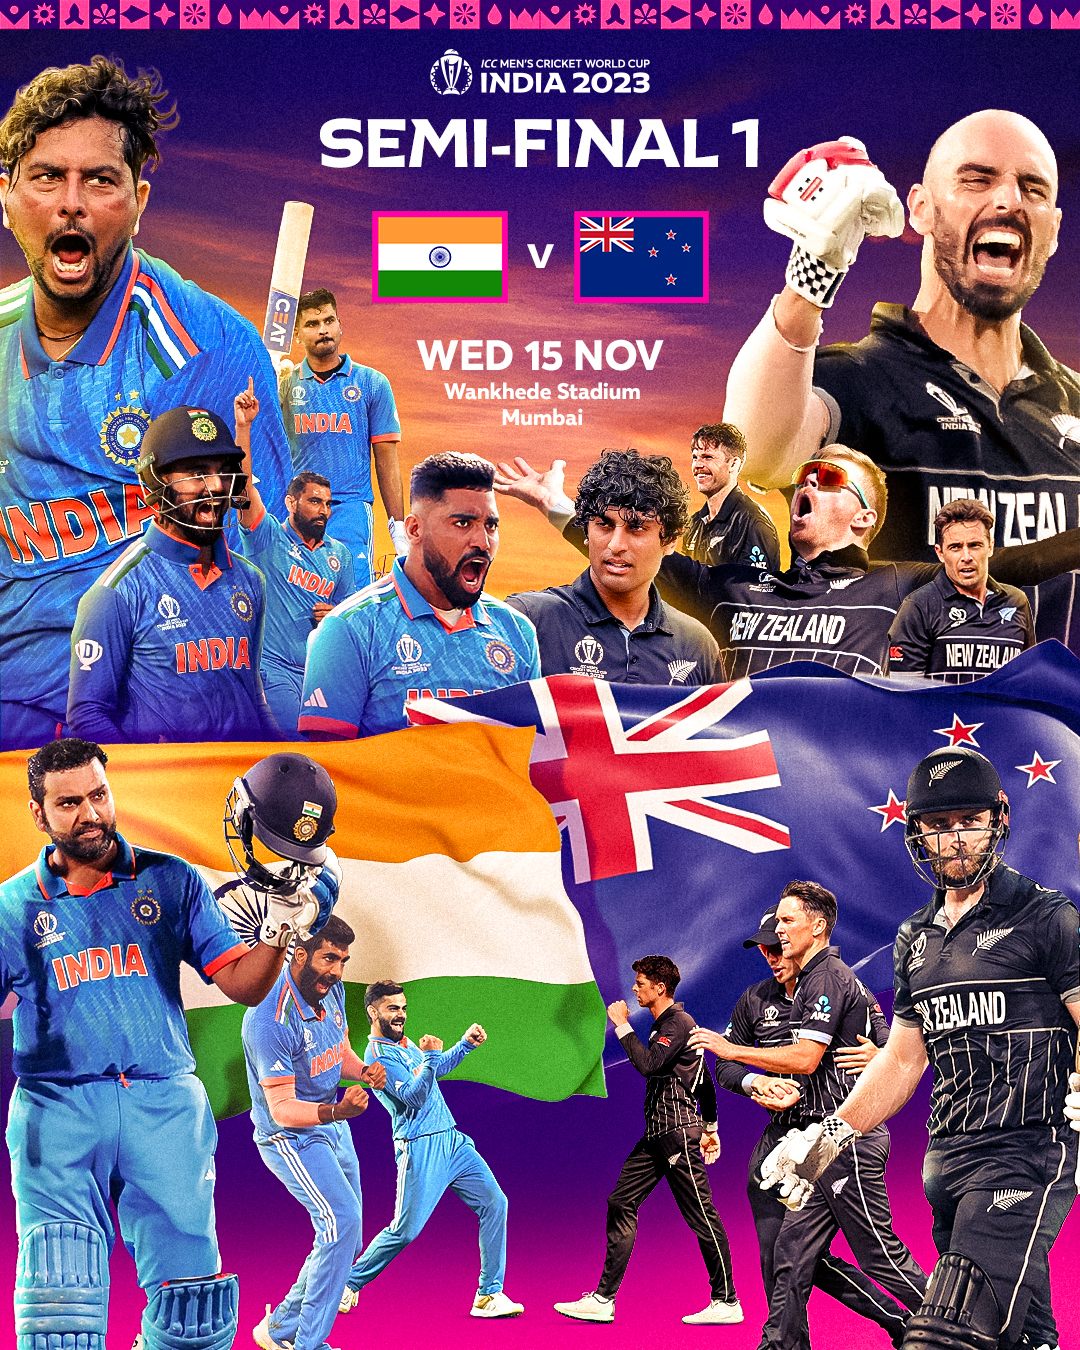 India vs New Zealand World Cup 2023